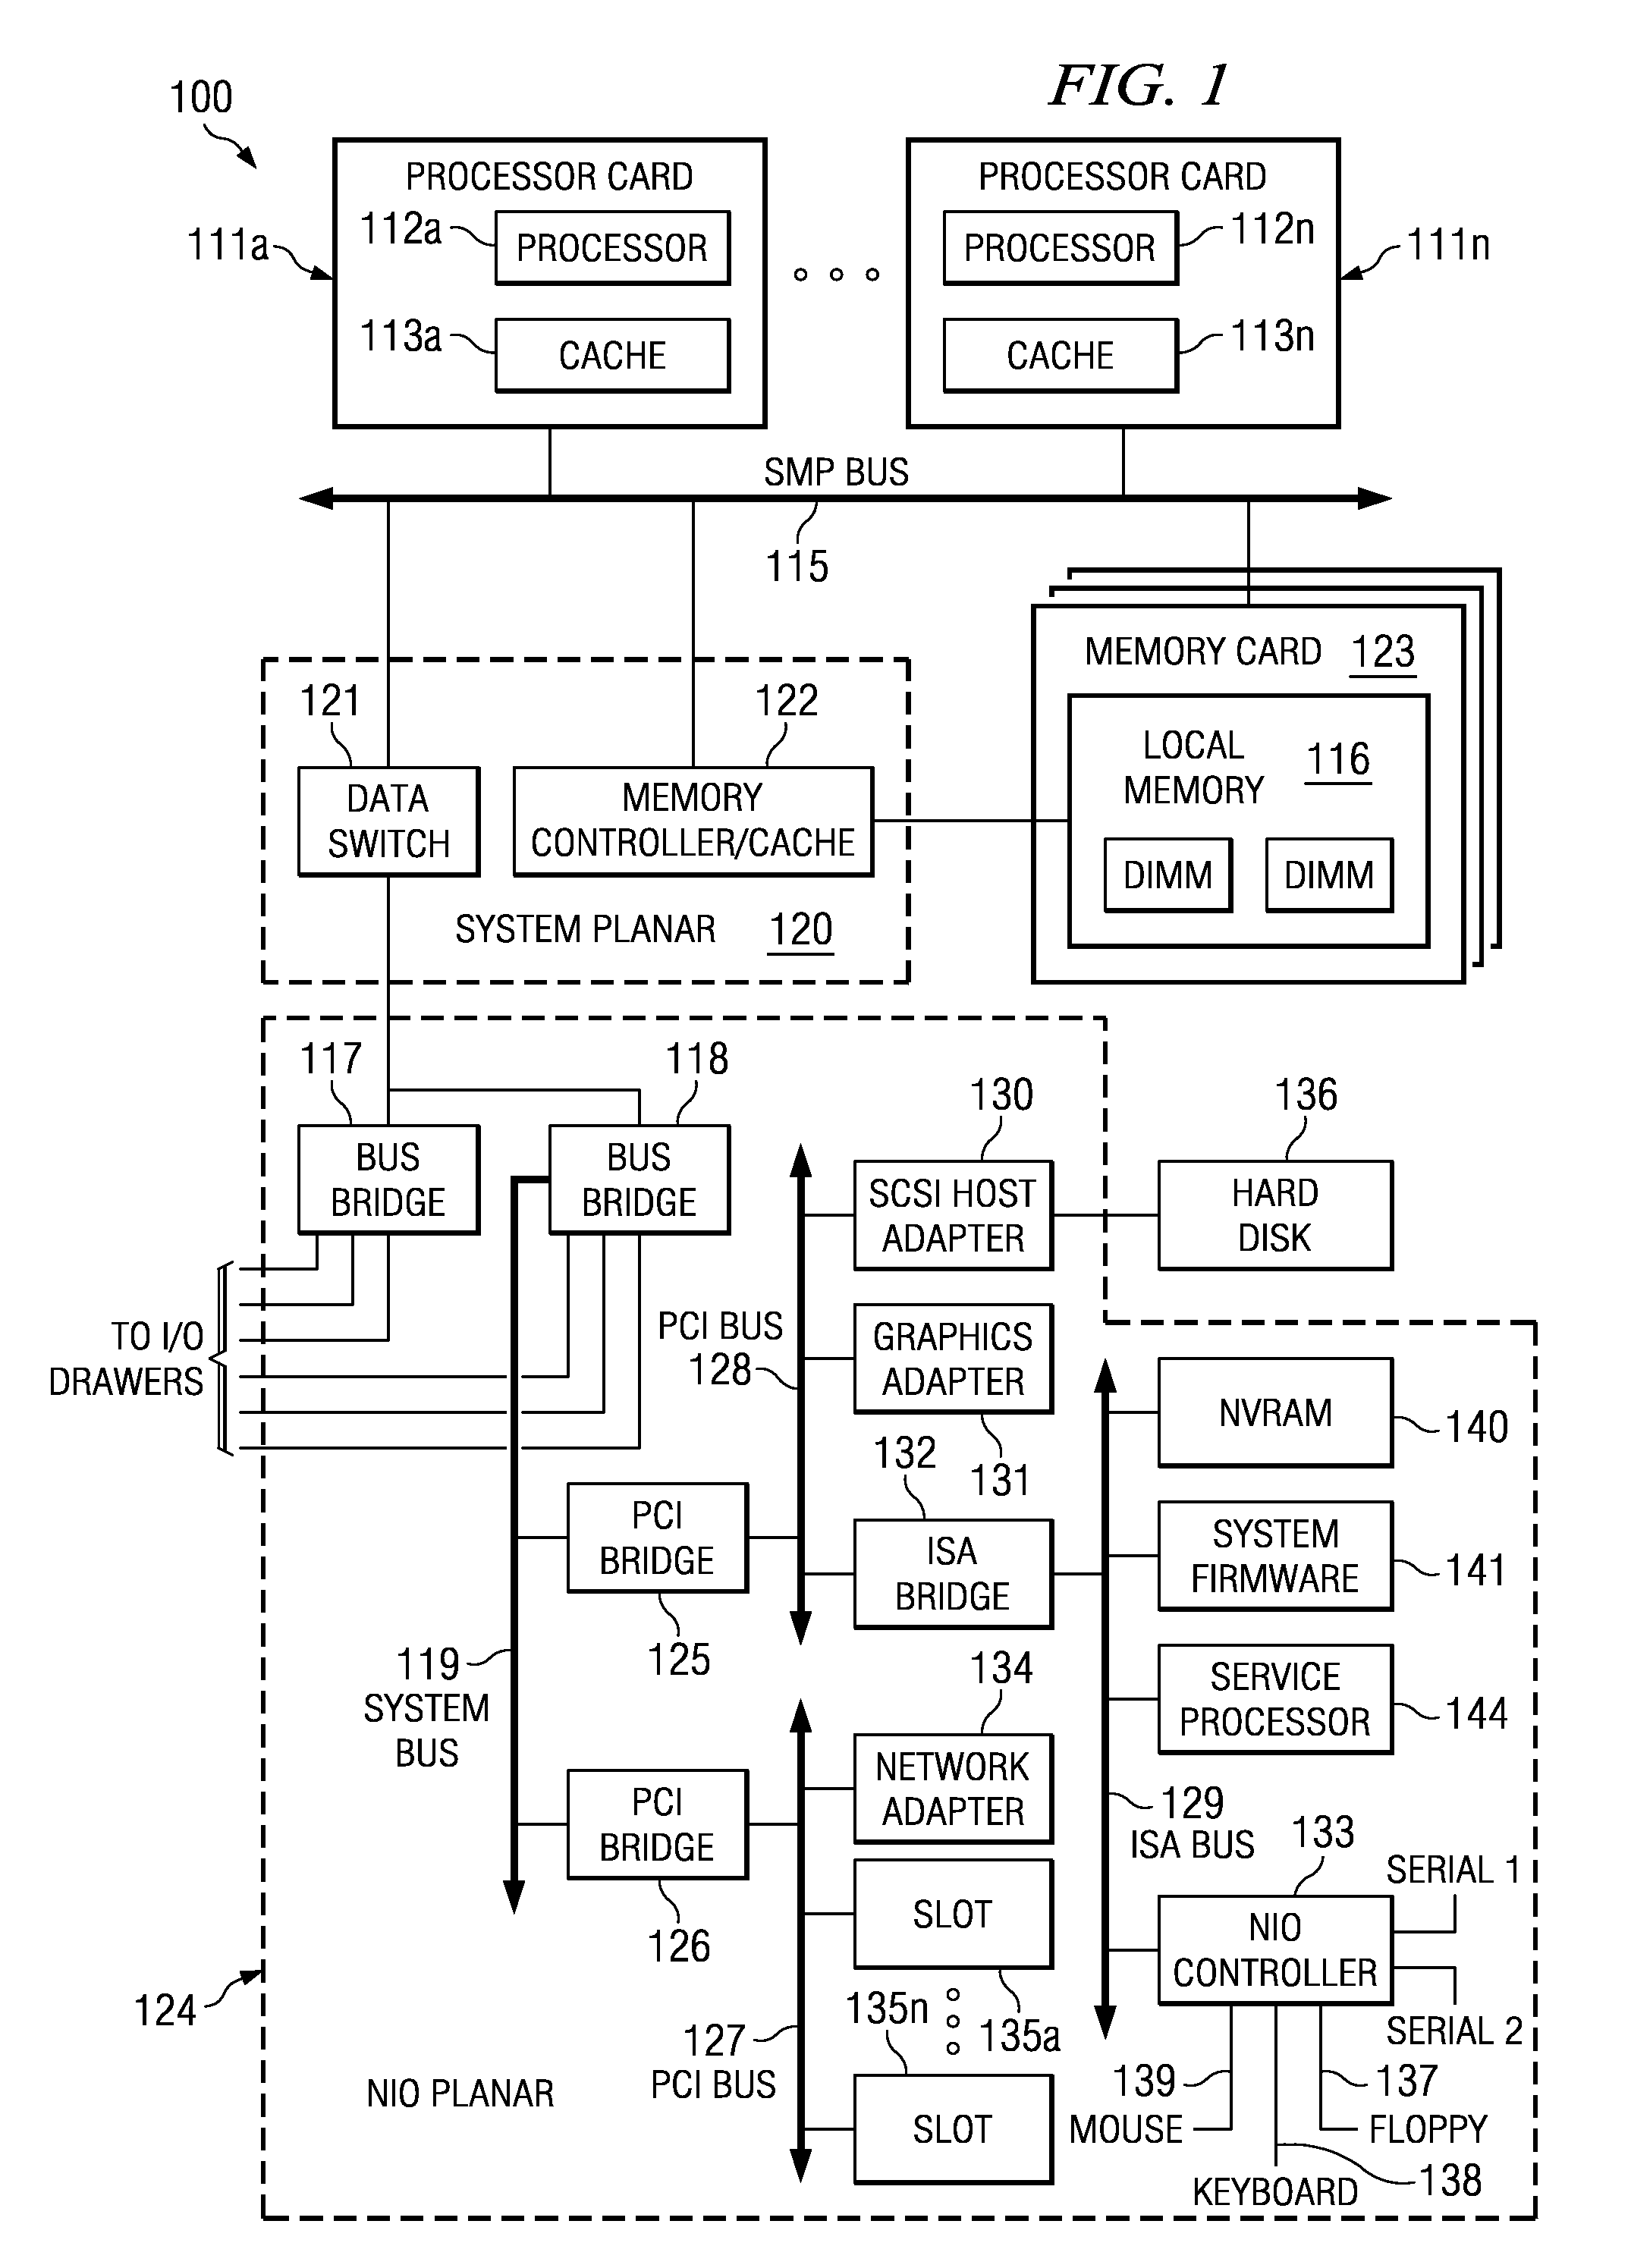 Wake-and-Go Mechanism with Data Monitoring